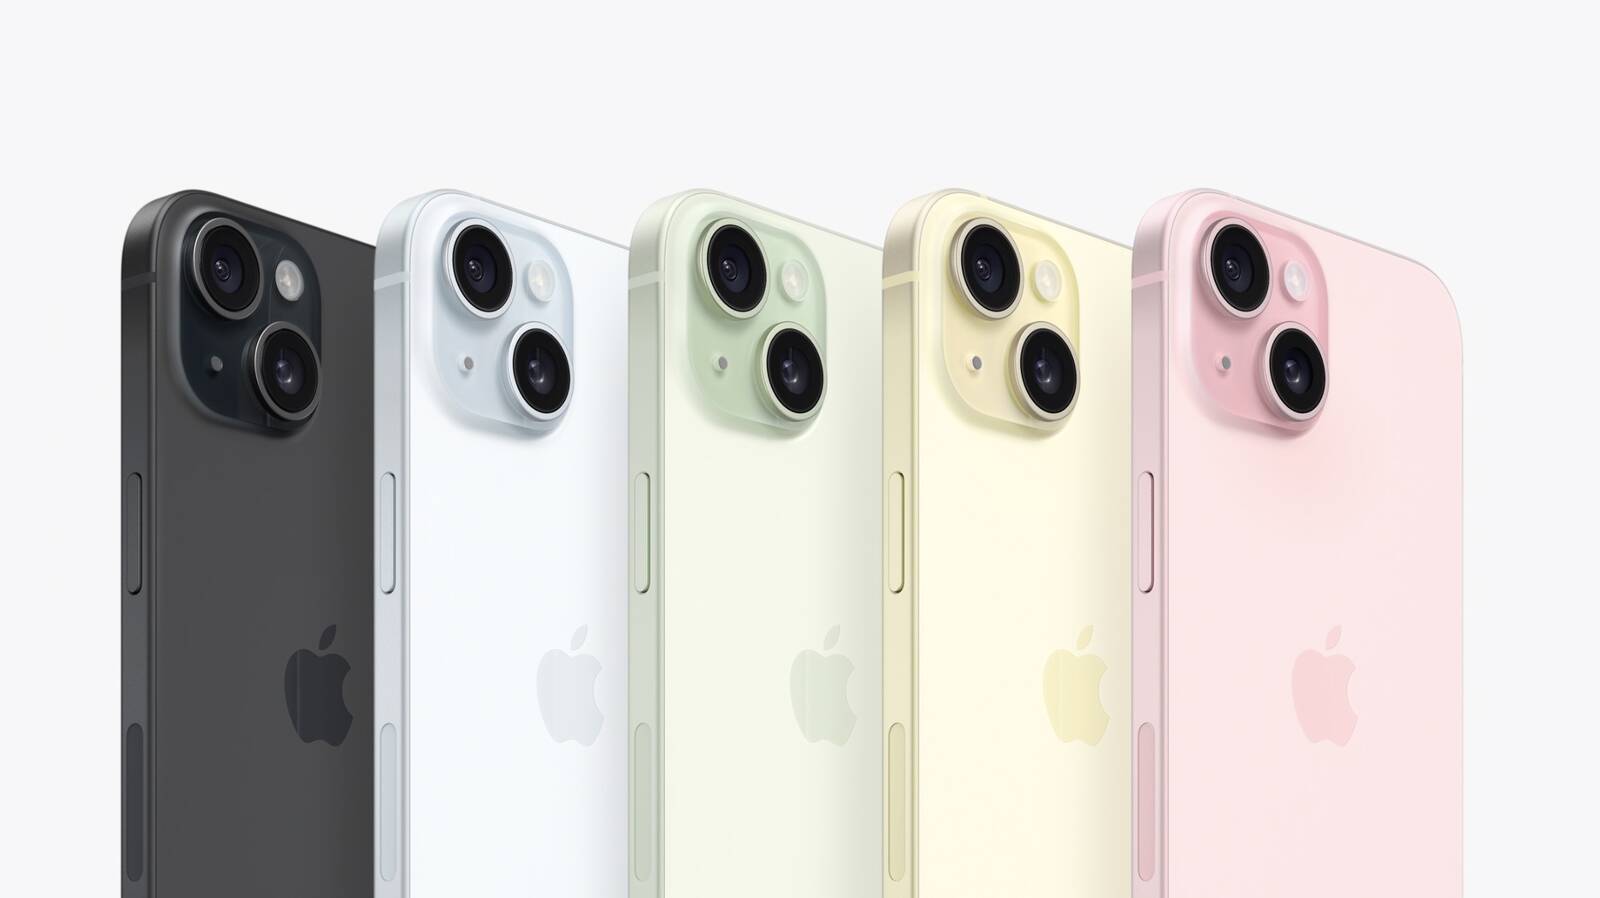 iPhone 15 showing backs with all five new colors - black, blue, green, yellow, and pink